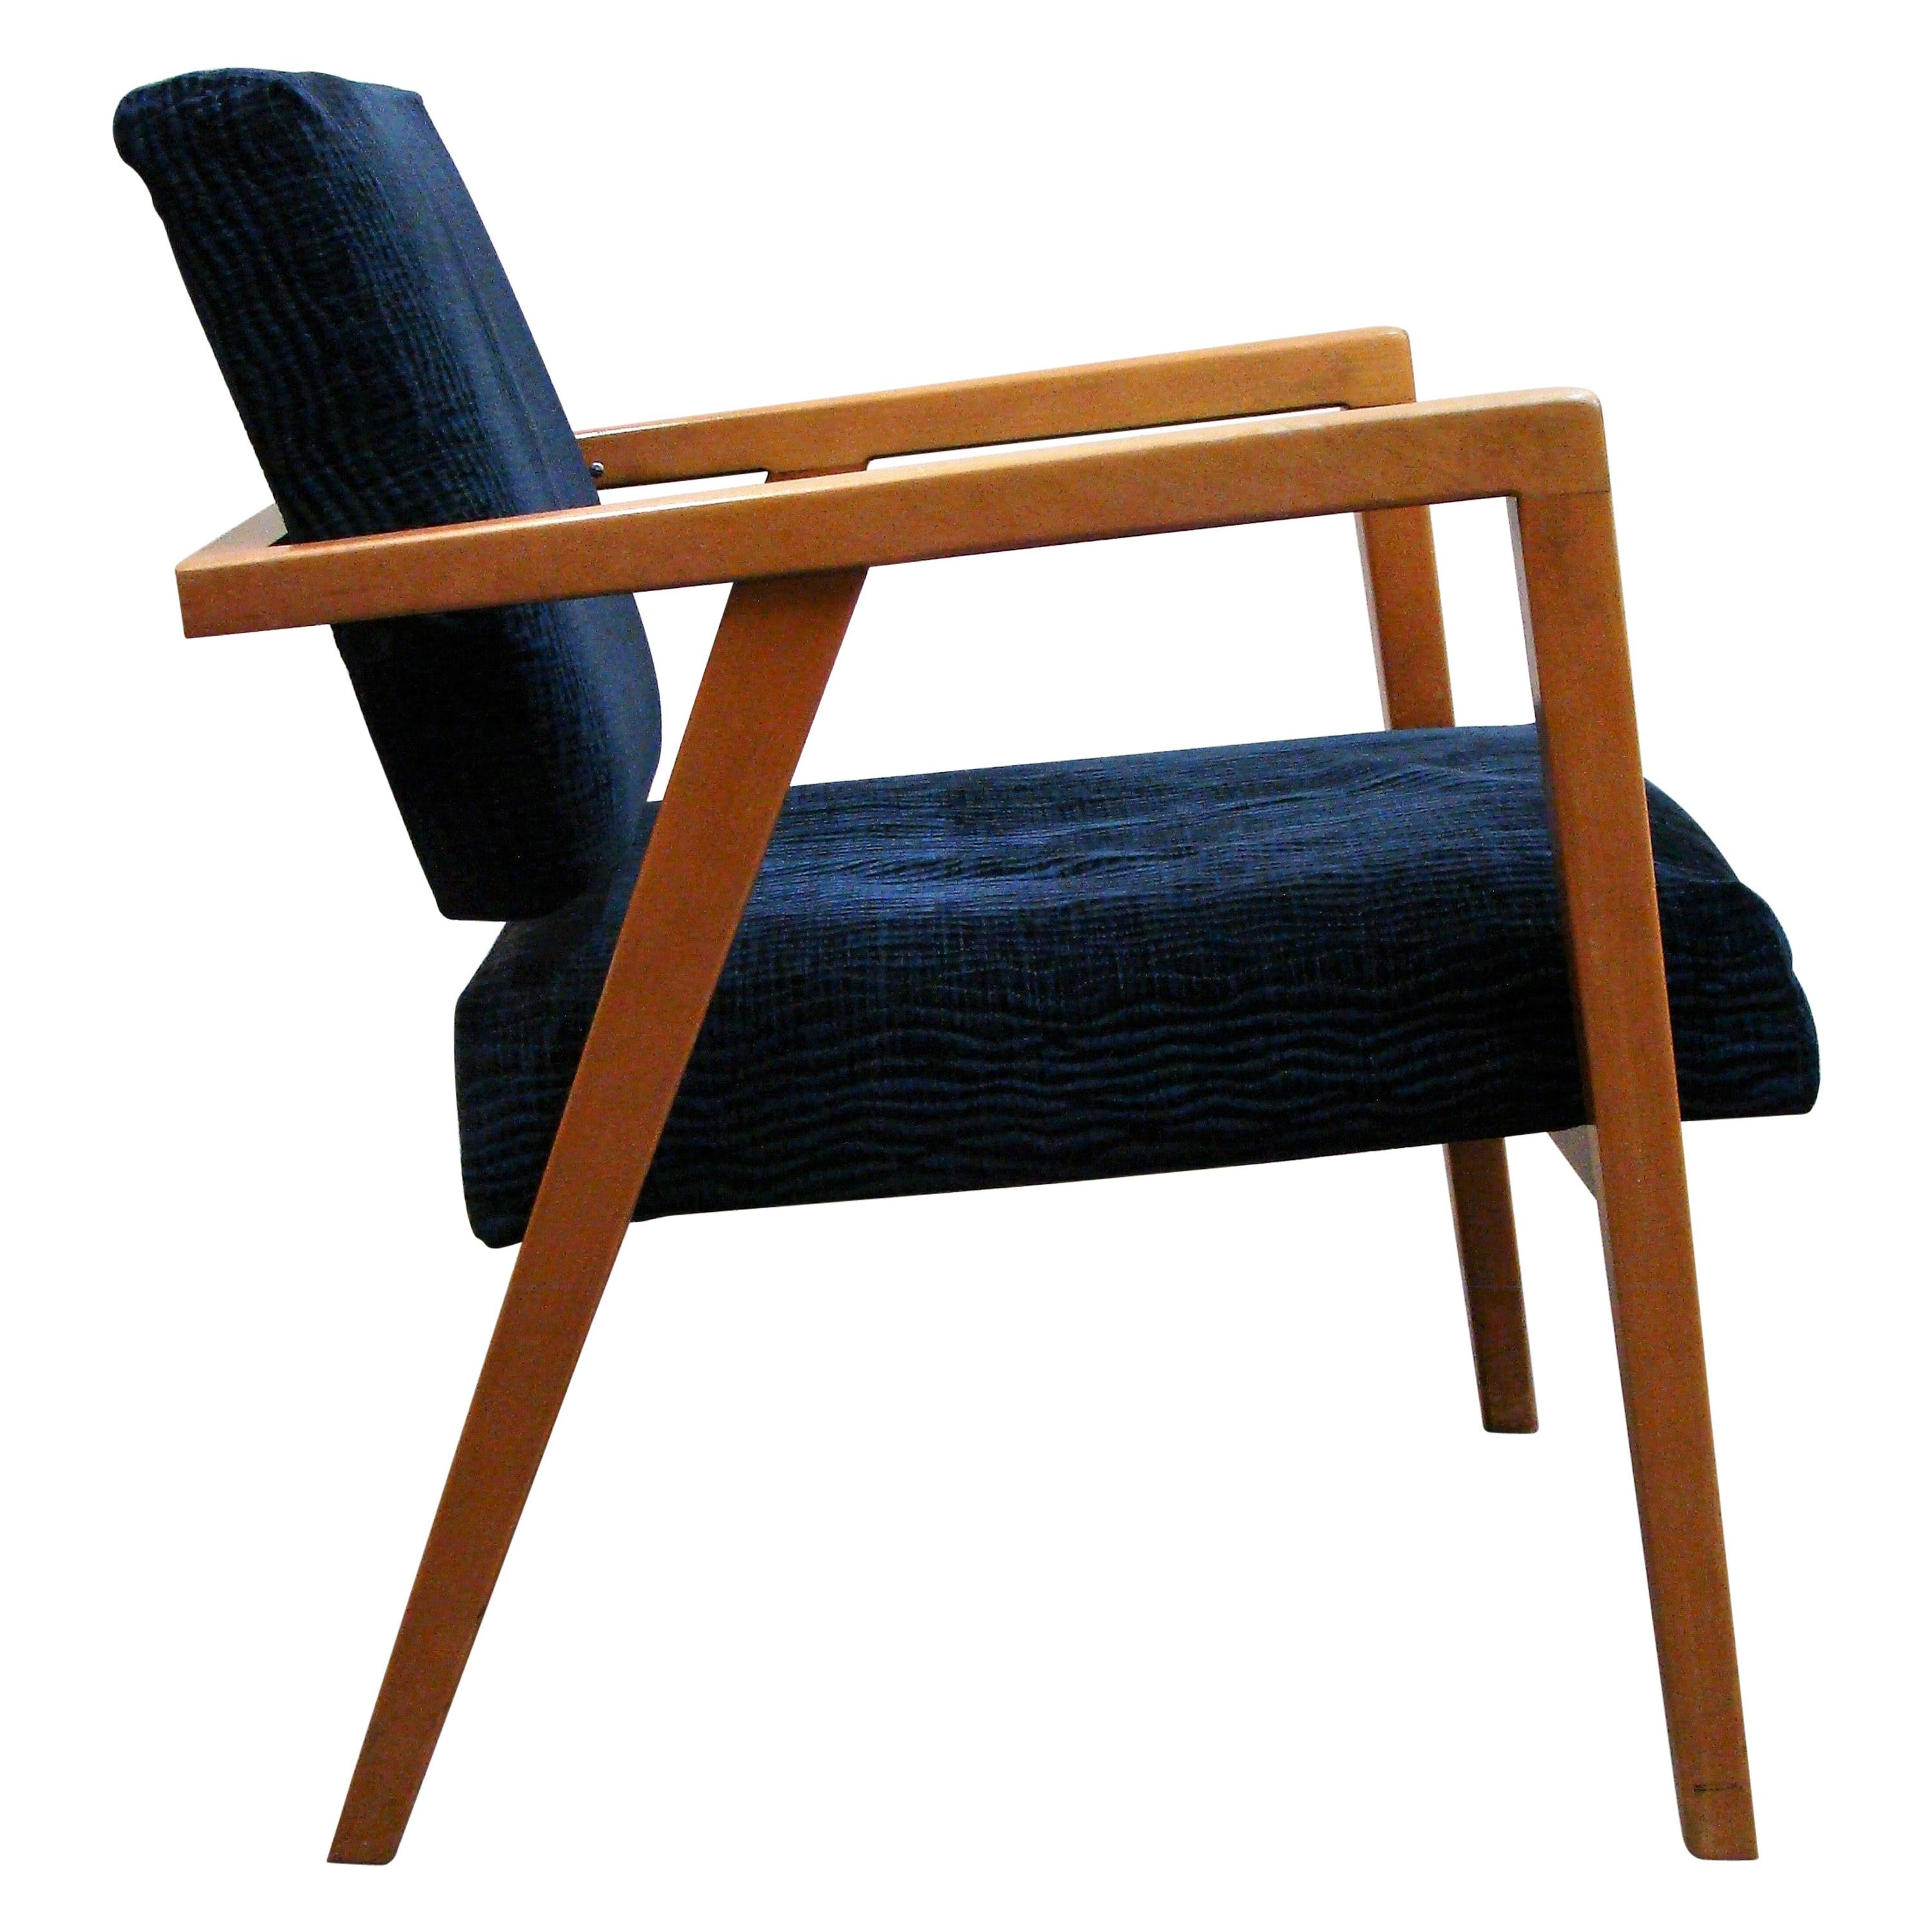 Lounge Chair by Franco Albini for Knoll, circa 1952